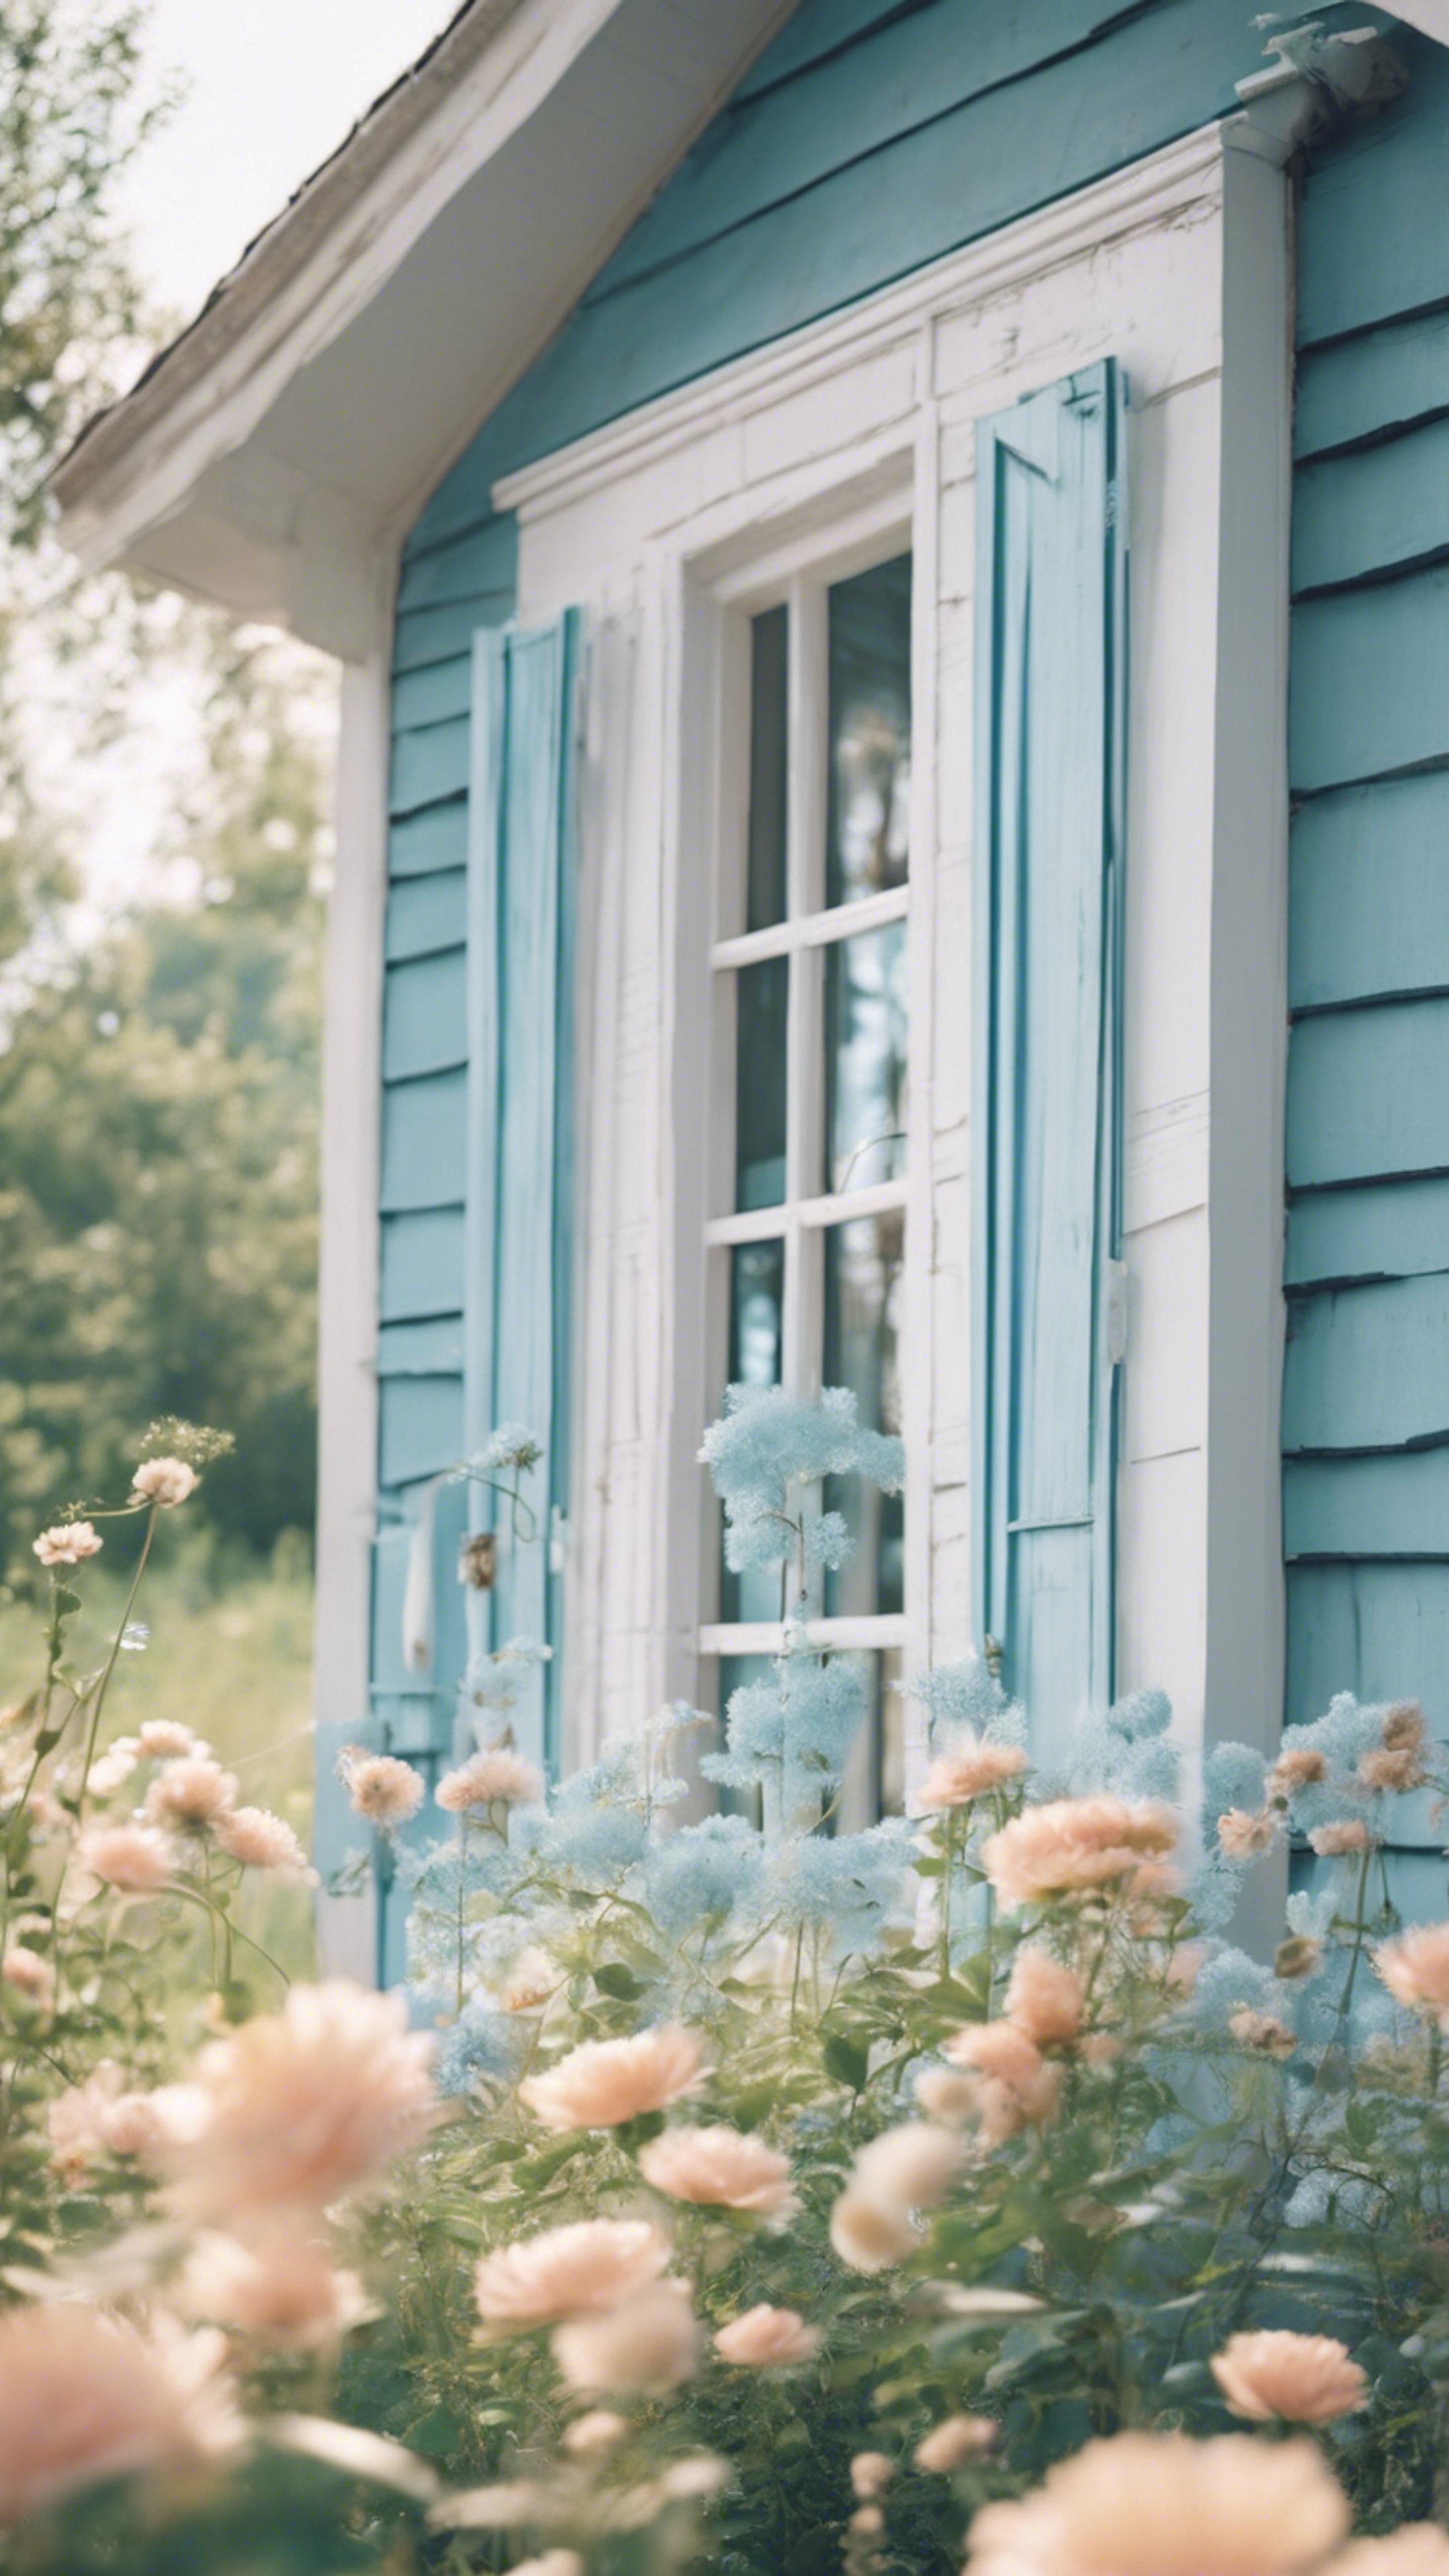 Preppy pastel blue summer farmhouse with white wooden windows. Kertas dinding[48dc49ad1a9b4a7c9166]